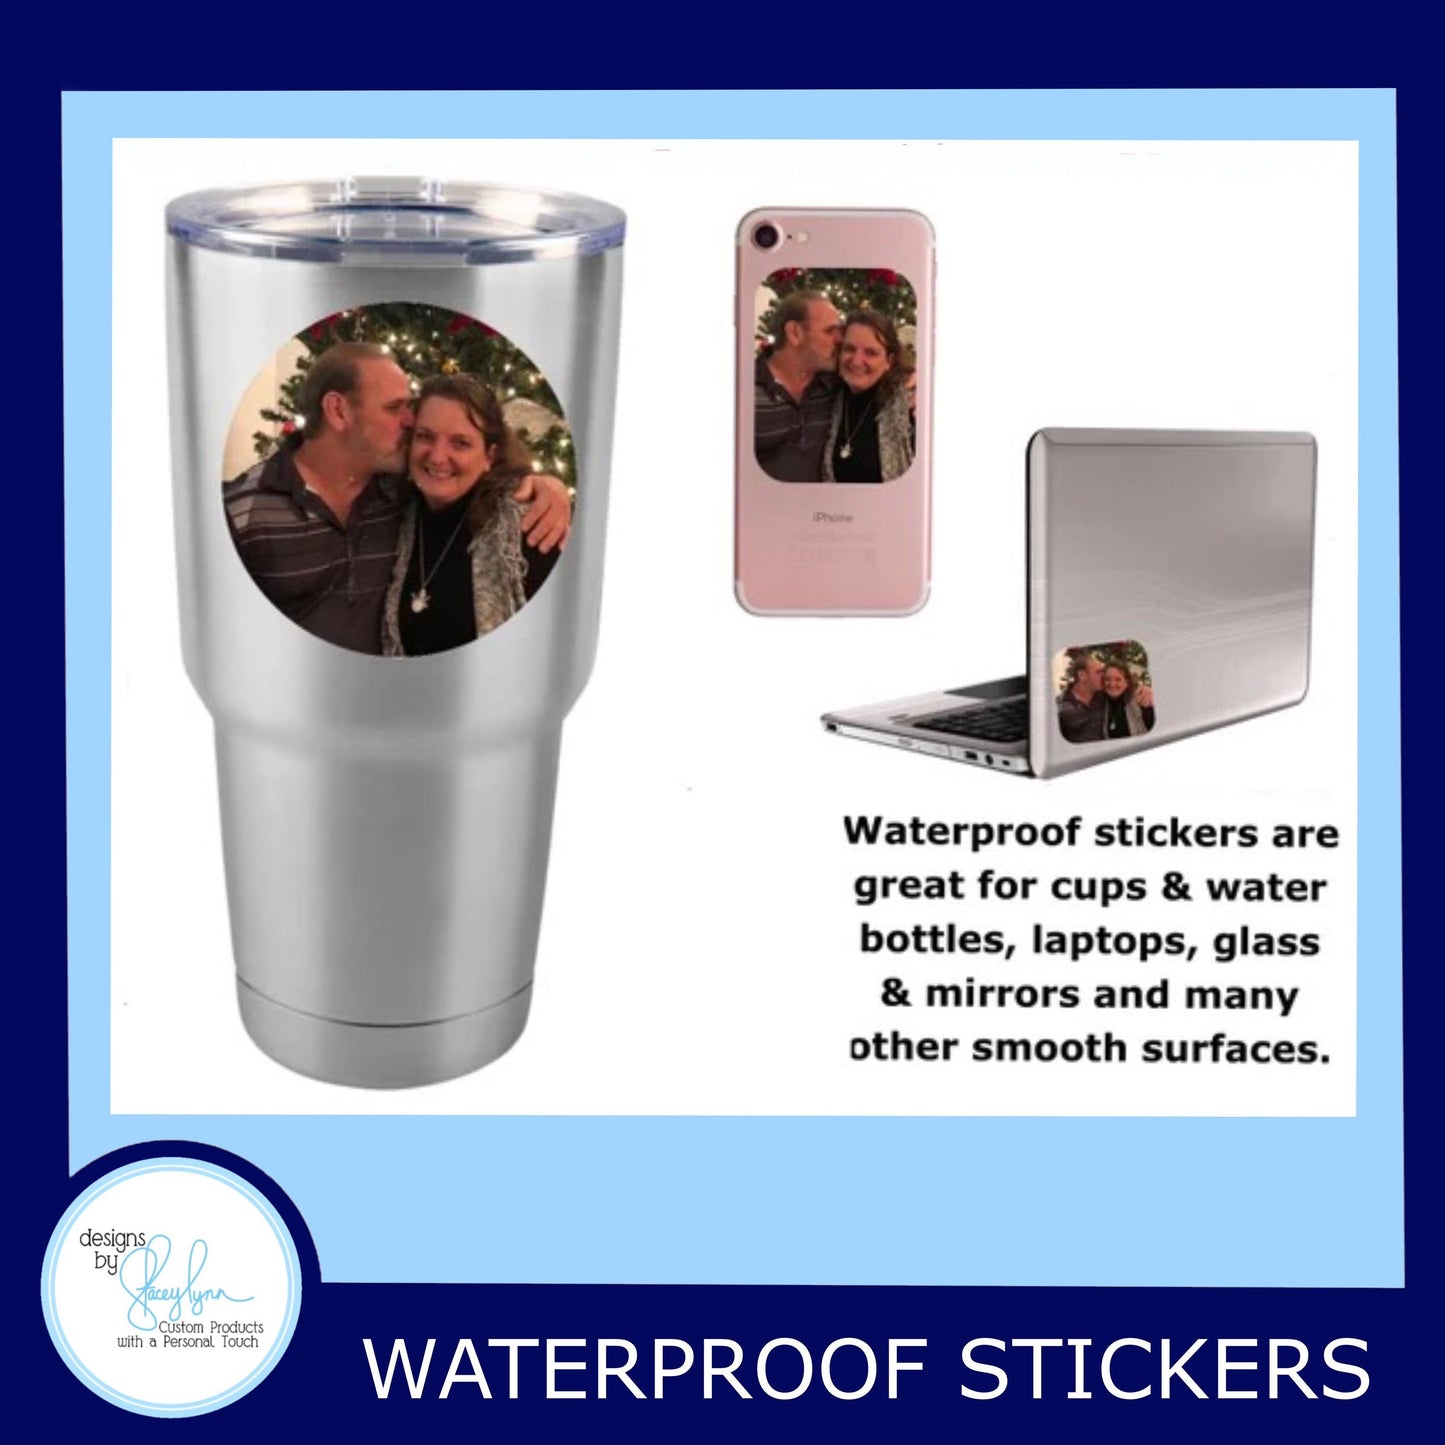 Girl, Drink your water, UV/ Waterproof Vinyl Sticker, Laptop Sticker, Water bottle decal, Gift for sticker collectorchoice of size